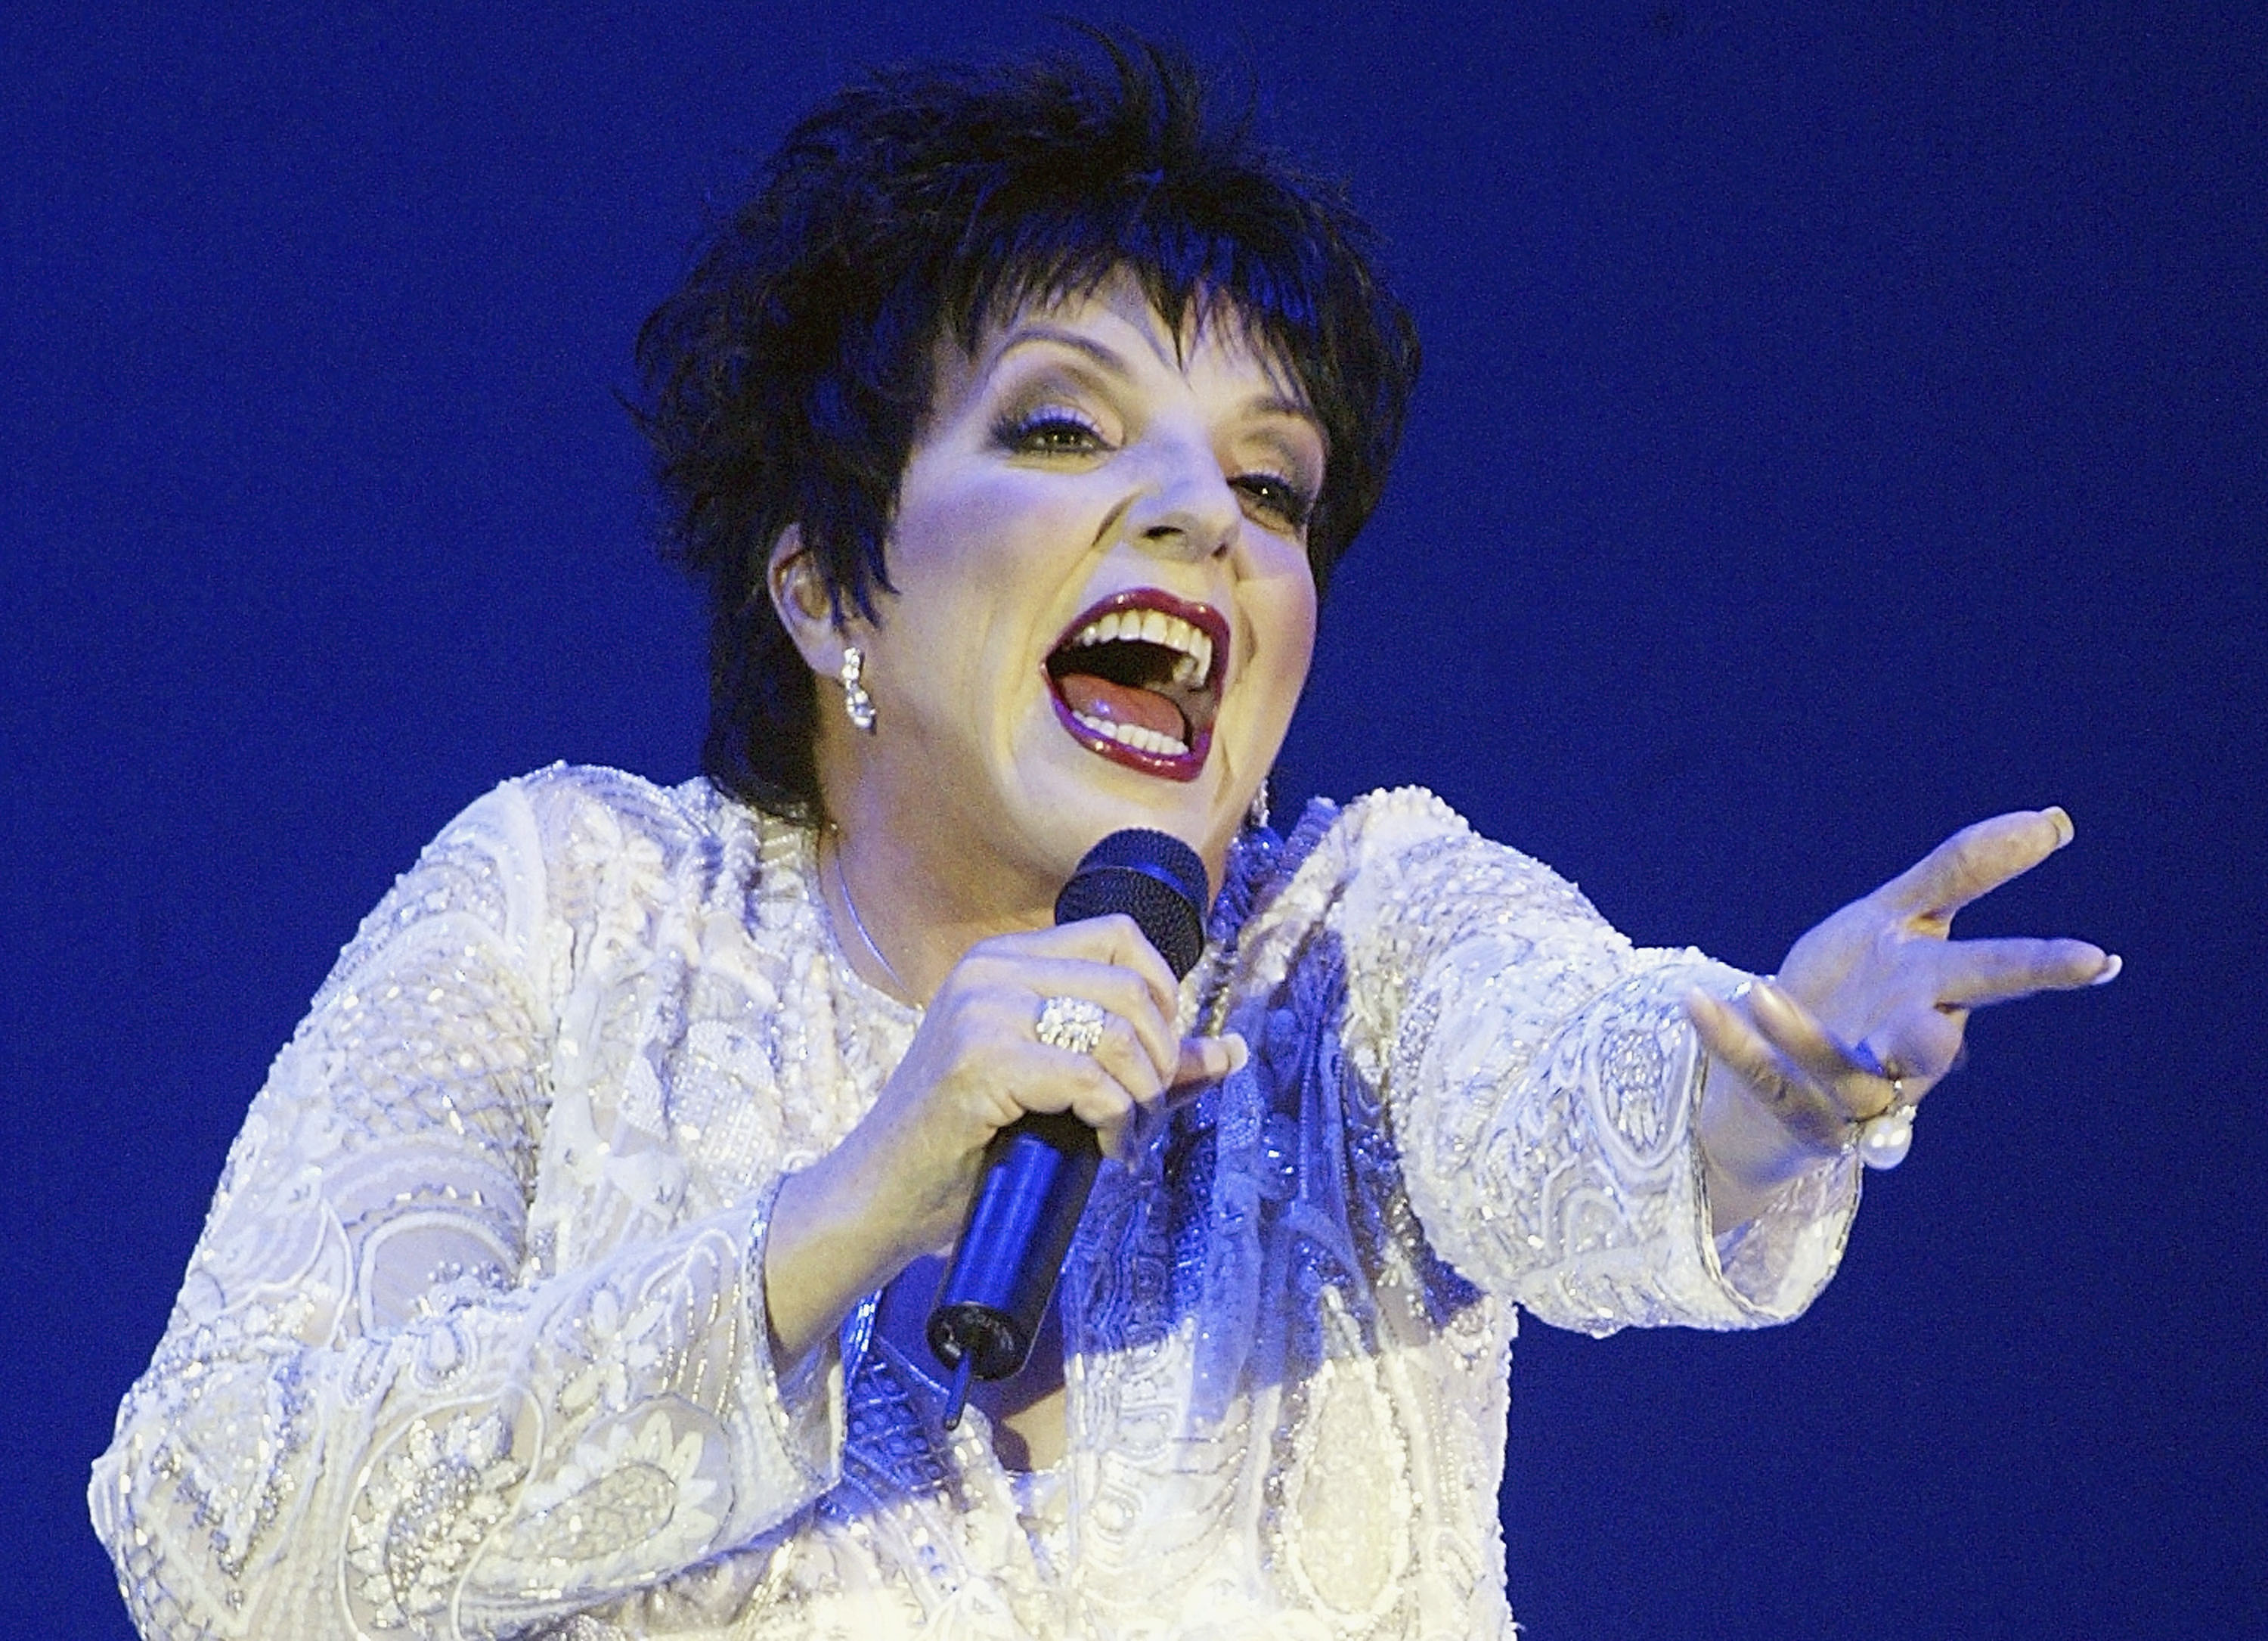 Liza Minelli performs at the "Macy's and American Express Passport 2003" to raise money for HIV research on October 2, 2003 in Santa Monica, California. | Source: Getty Images